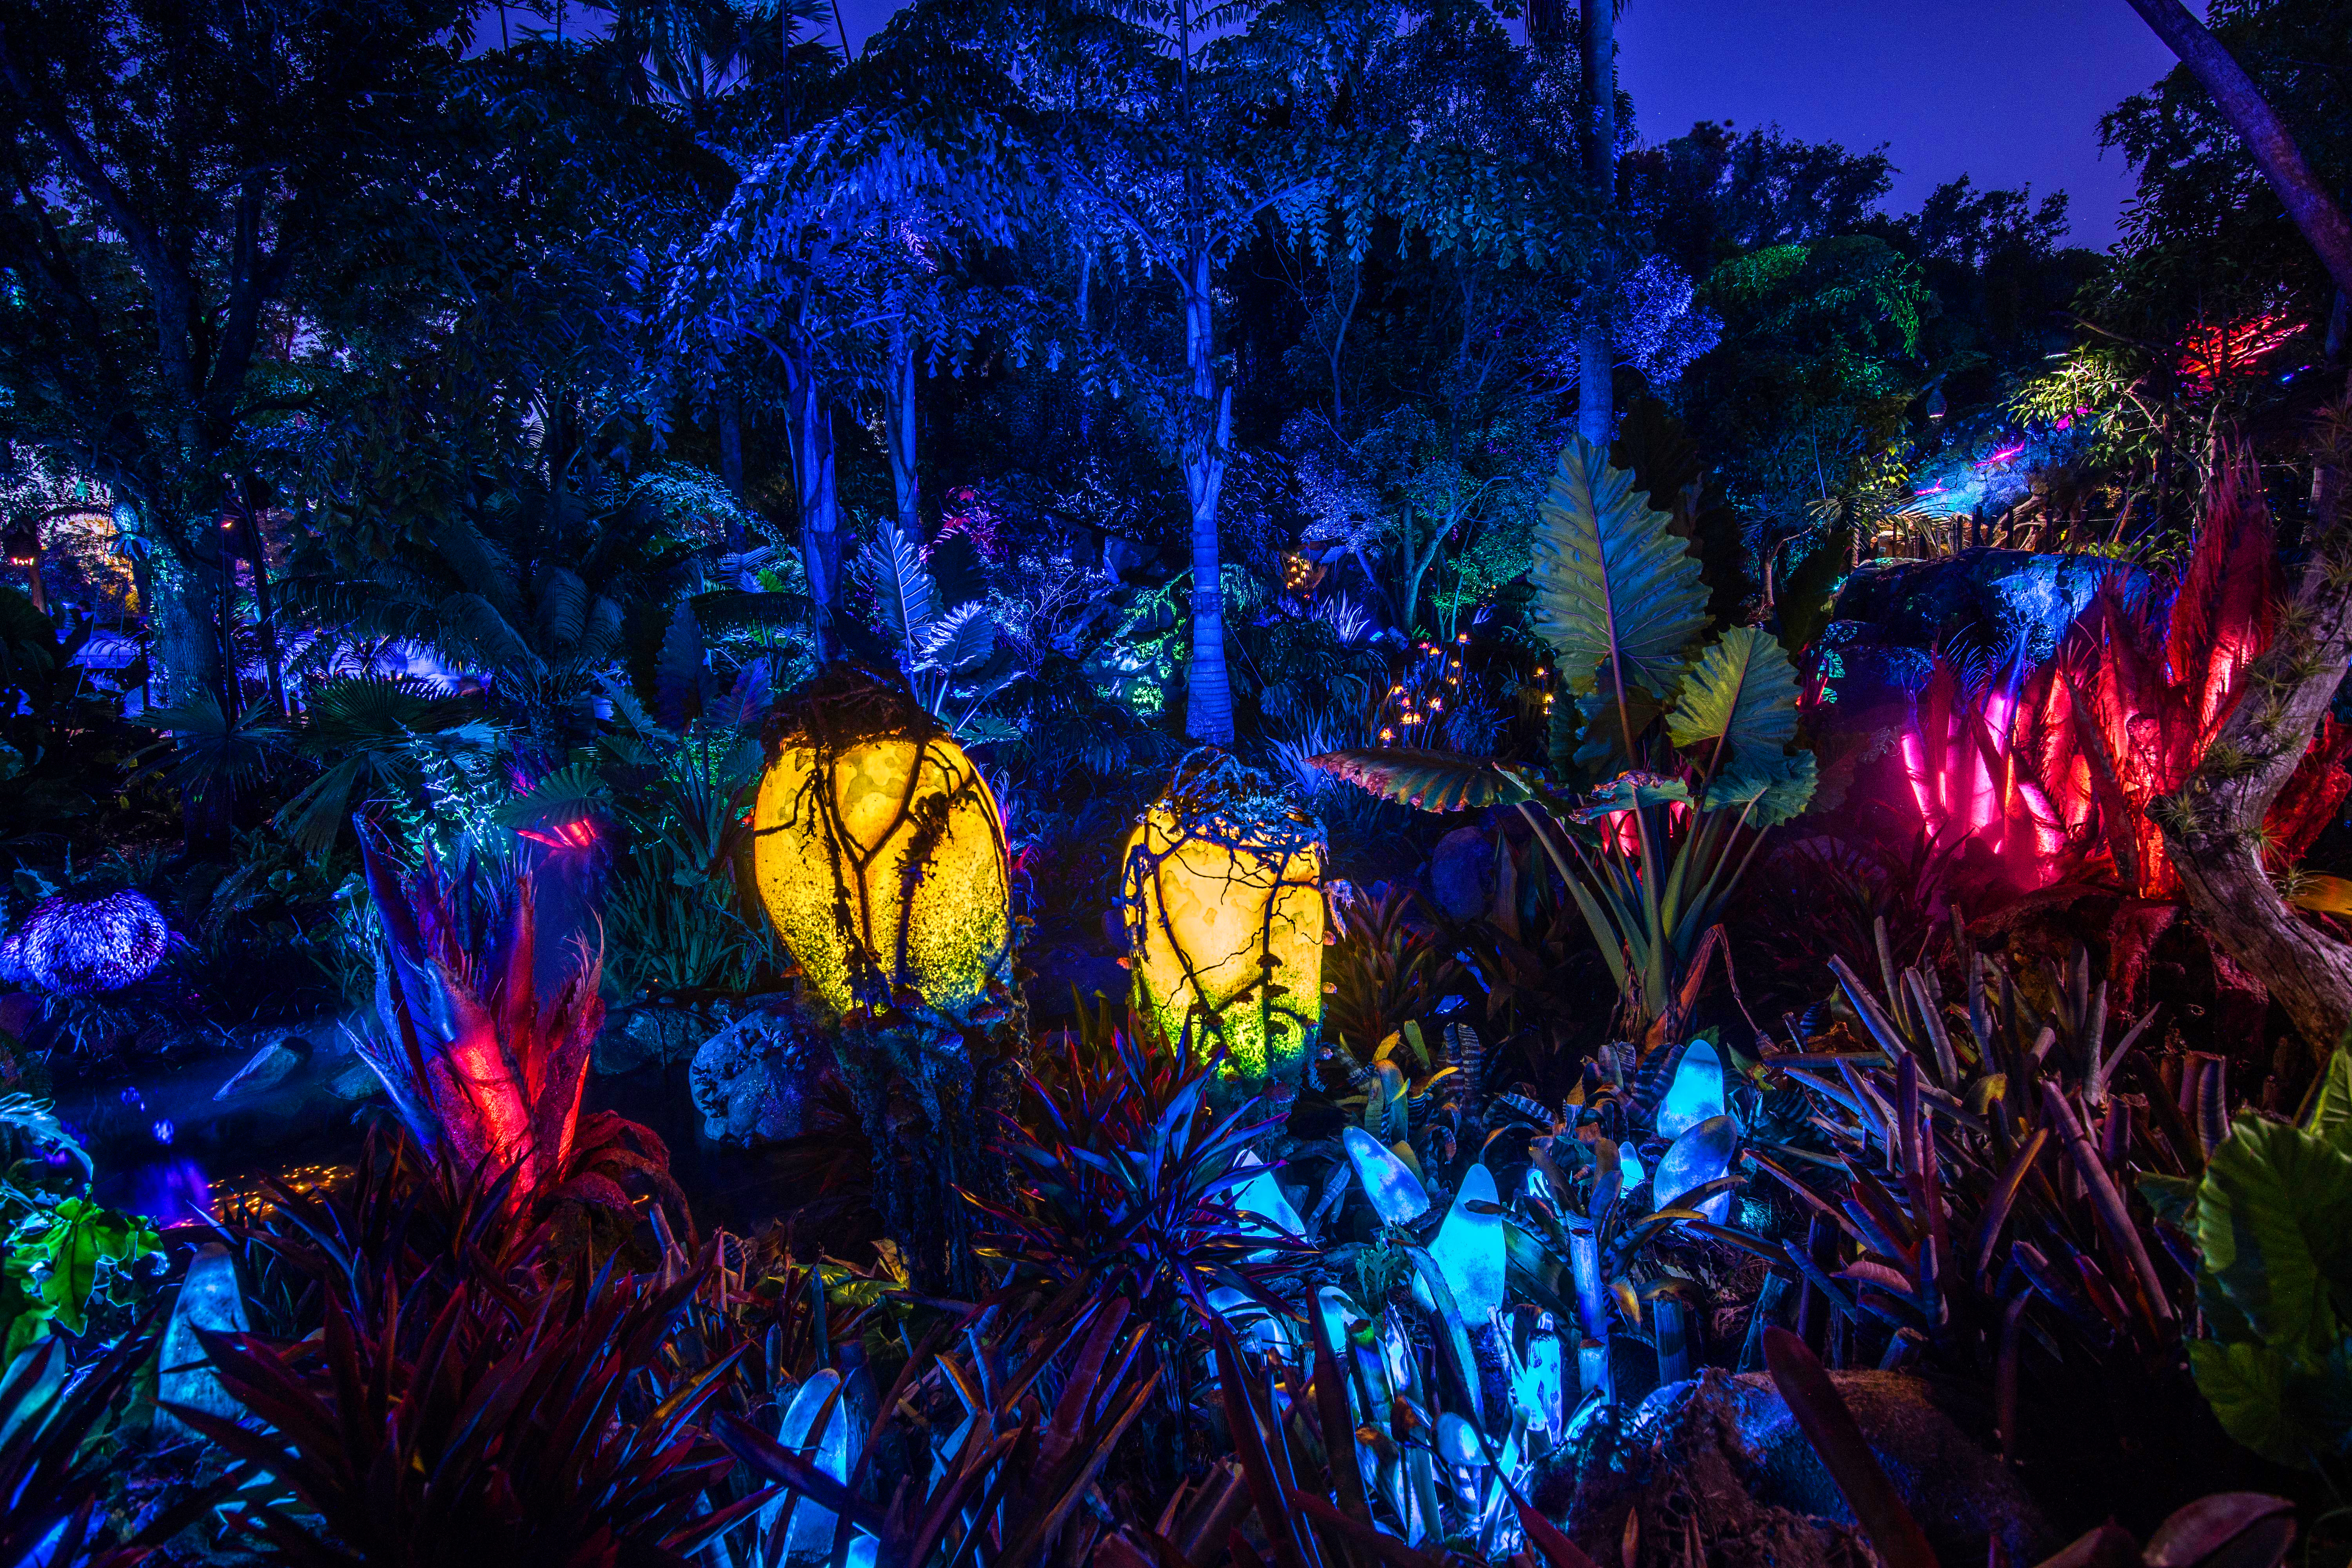 General 6000x4000 exotic colorful neon plants trees grass blue red lamp Avatar mushroom